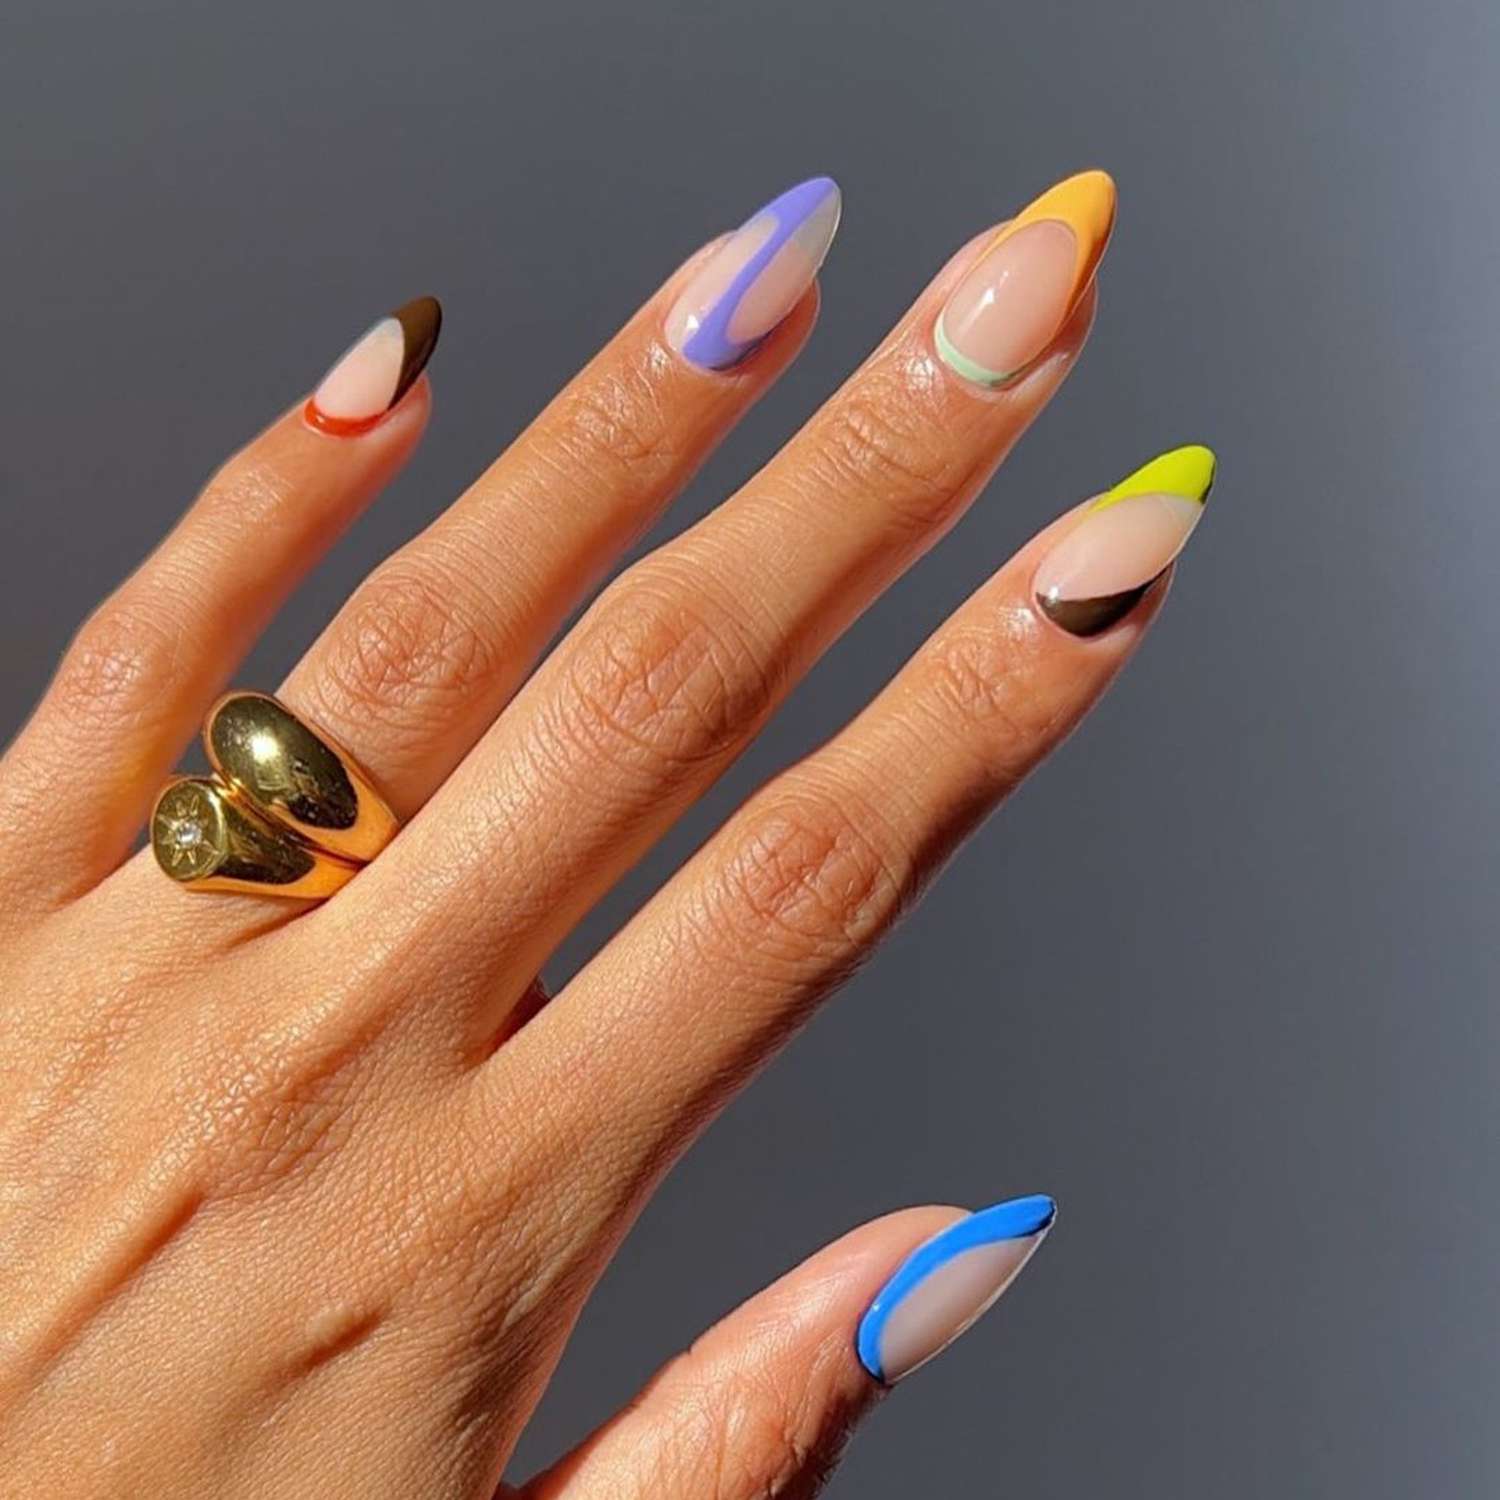 Abstract French Nails - Byrdie French Skittle Nails